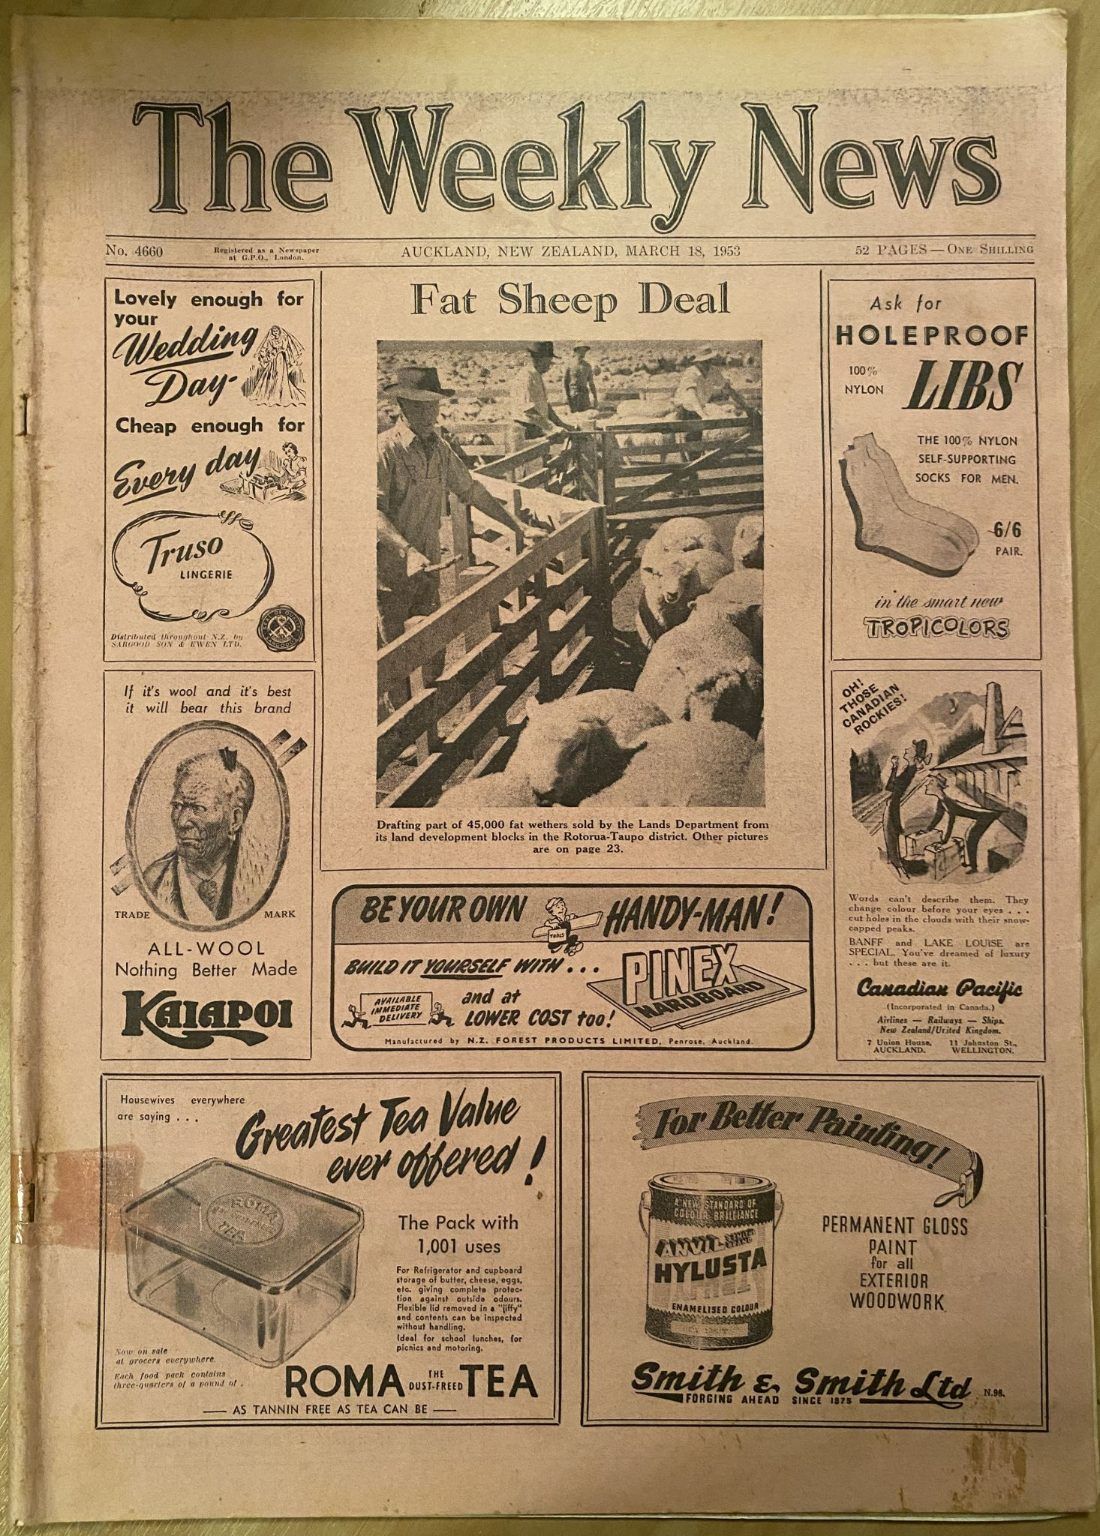 OLD NEWSPAPER: The Weekly News - No. 4660, 18 March 1953